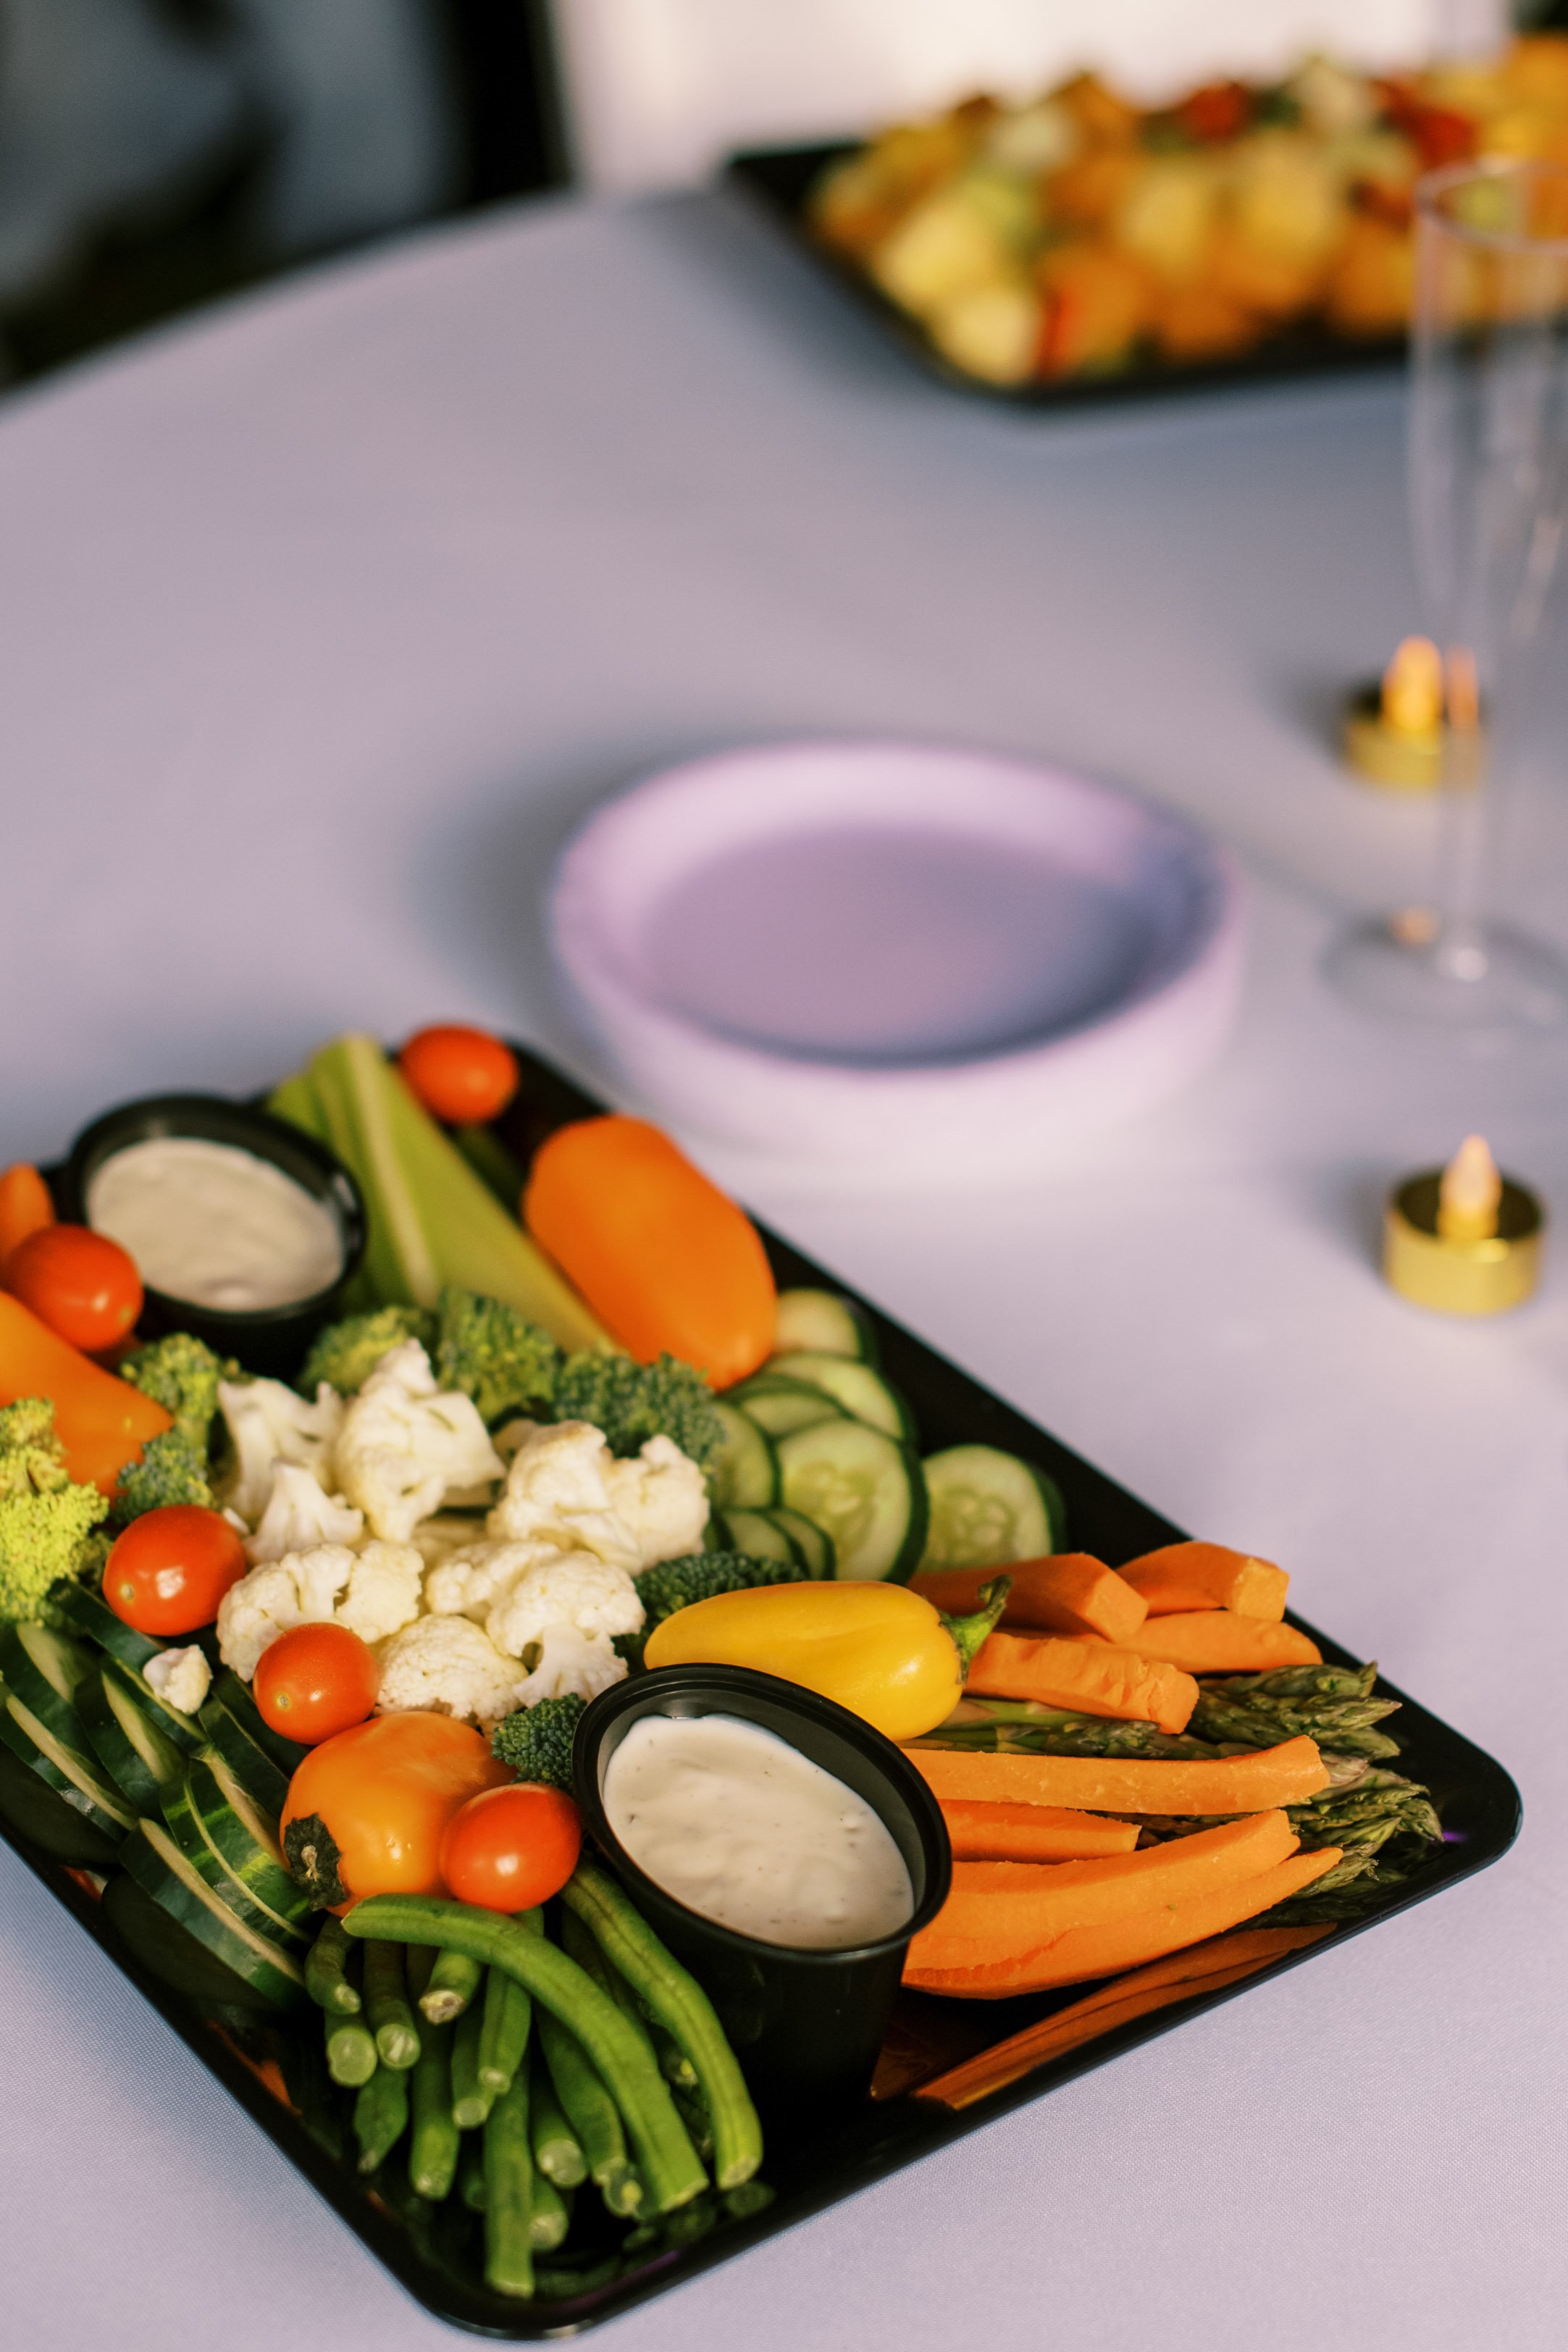 Vegetable Tray Beautiful Mebane NC Wedding in Family's Backyard Fancy This Photography